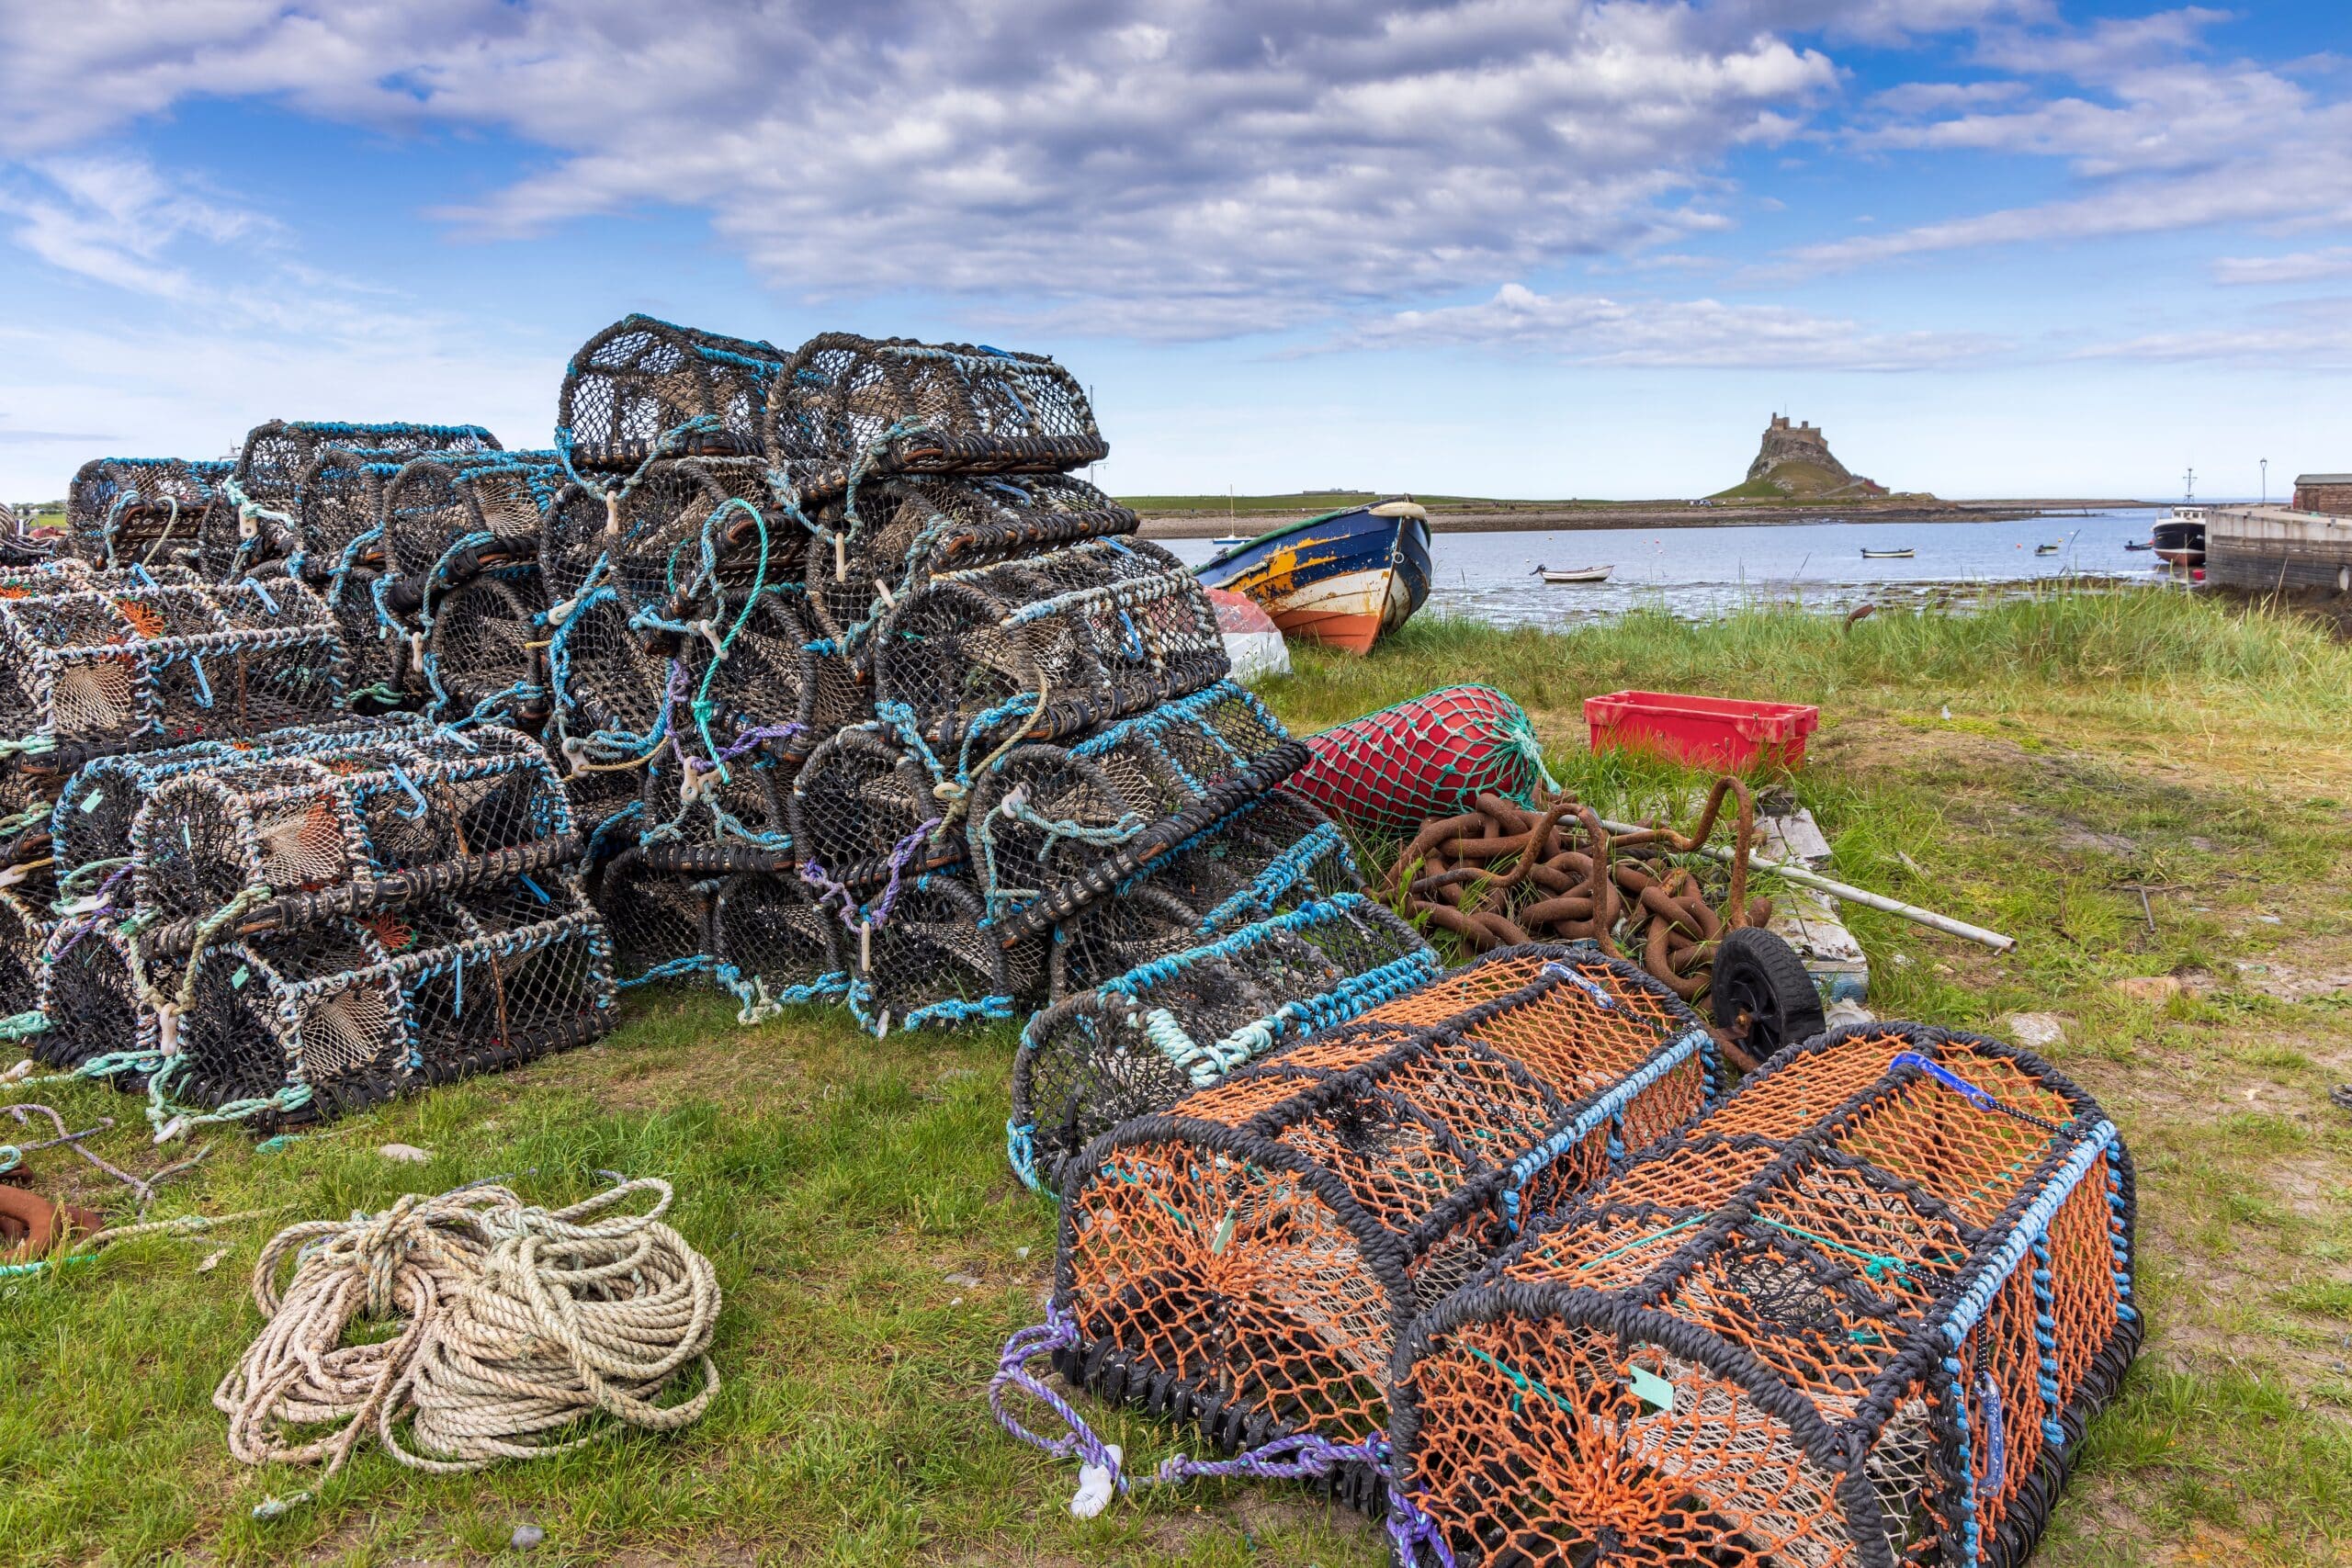 Lindisfarne Castle in the background with a bright blue clouded sky. In the foreground a stack of lobster pots with the seaward harbour dividing the two in the middle of image.